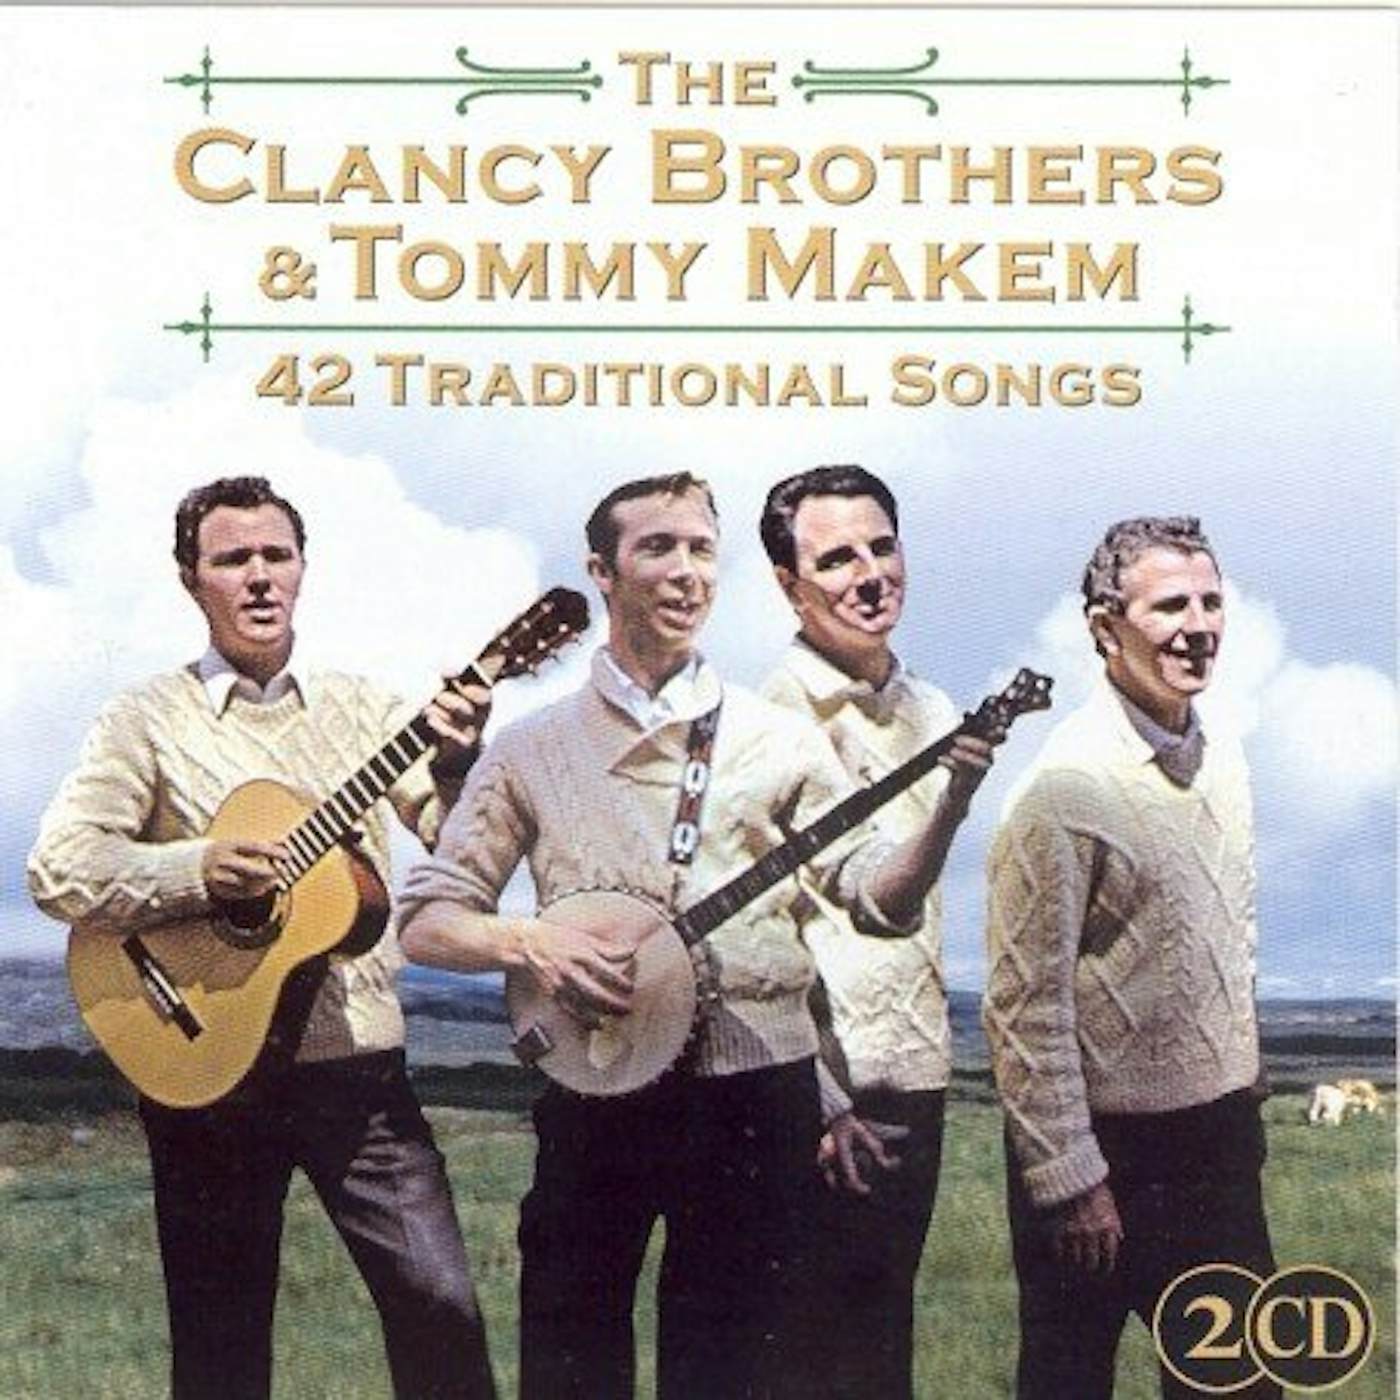 The Clancy Brothers 42 TRADITIONAL SONGS CD